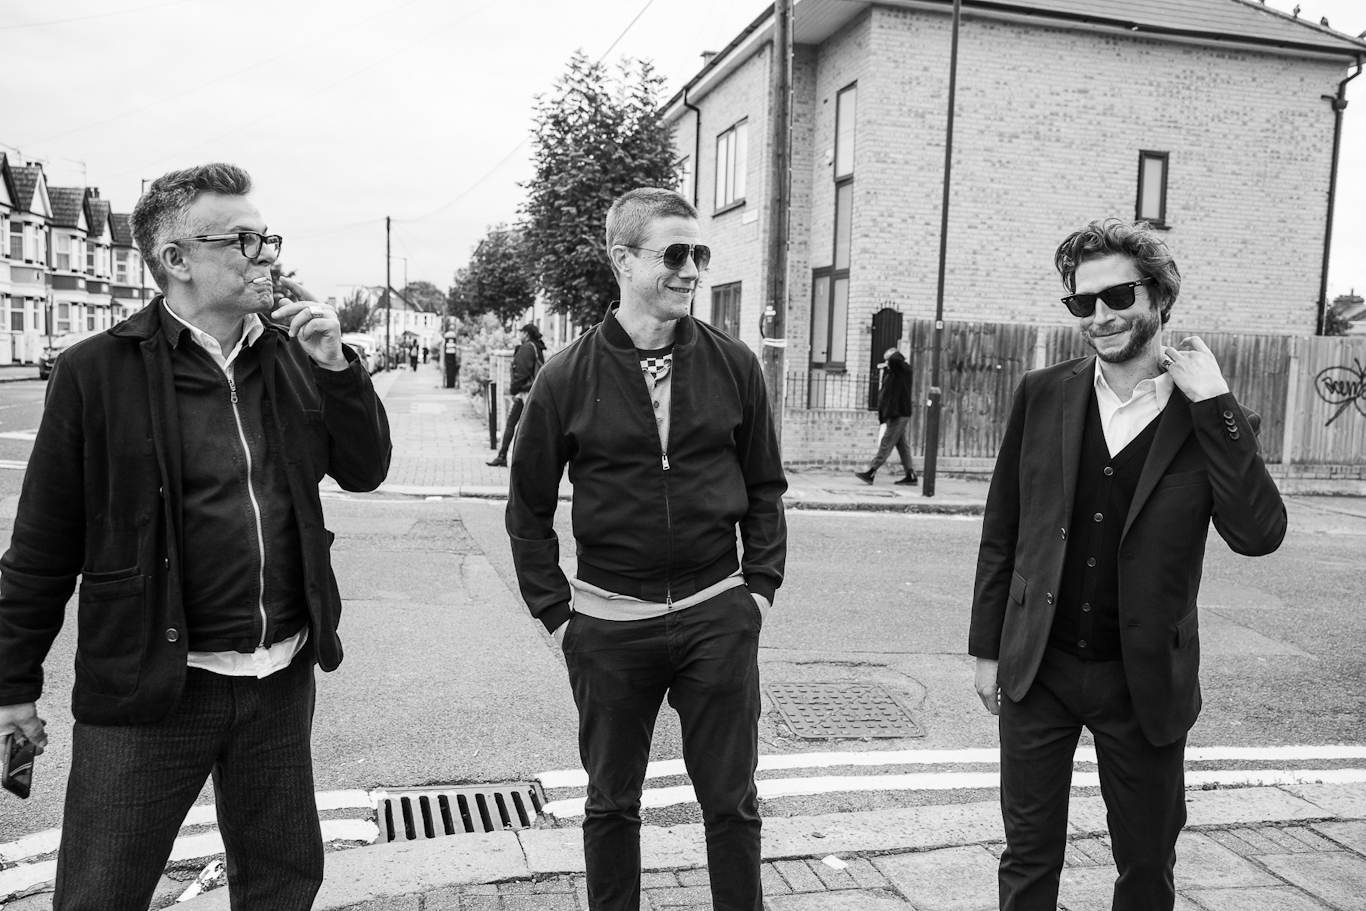 INTERPOL release brand new song 'Fables' taken from their new album ‘The Other Side Of Make-Believe' 1